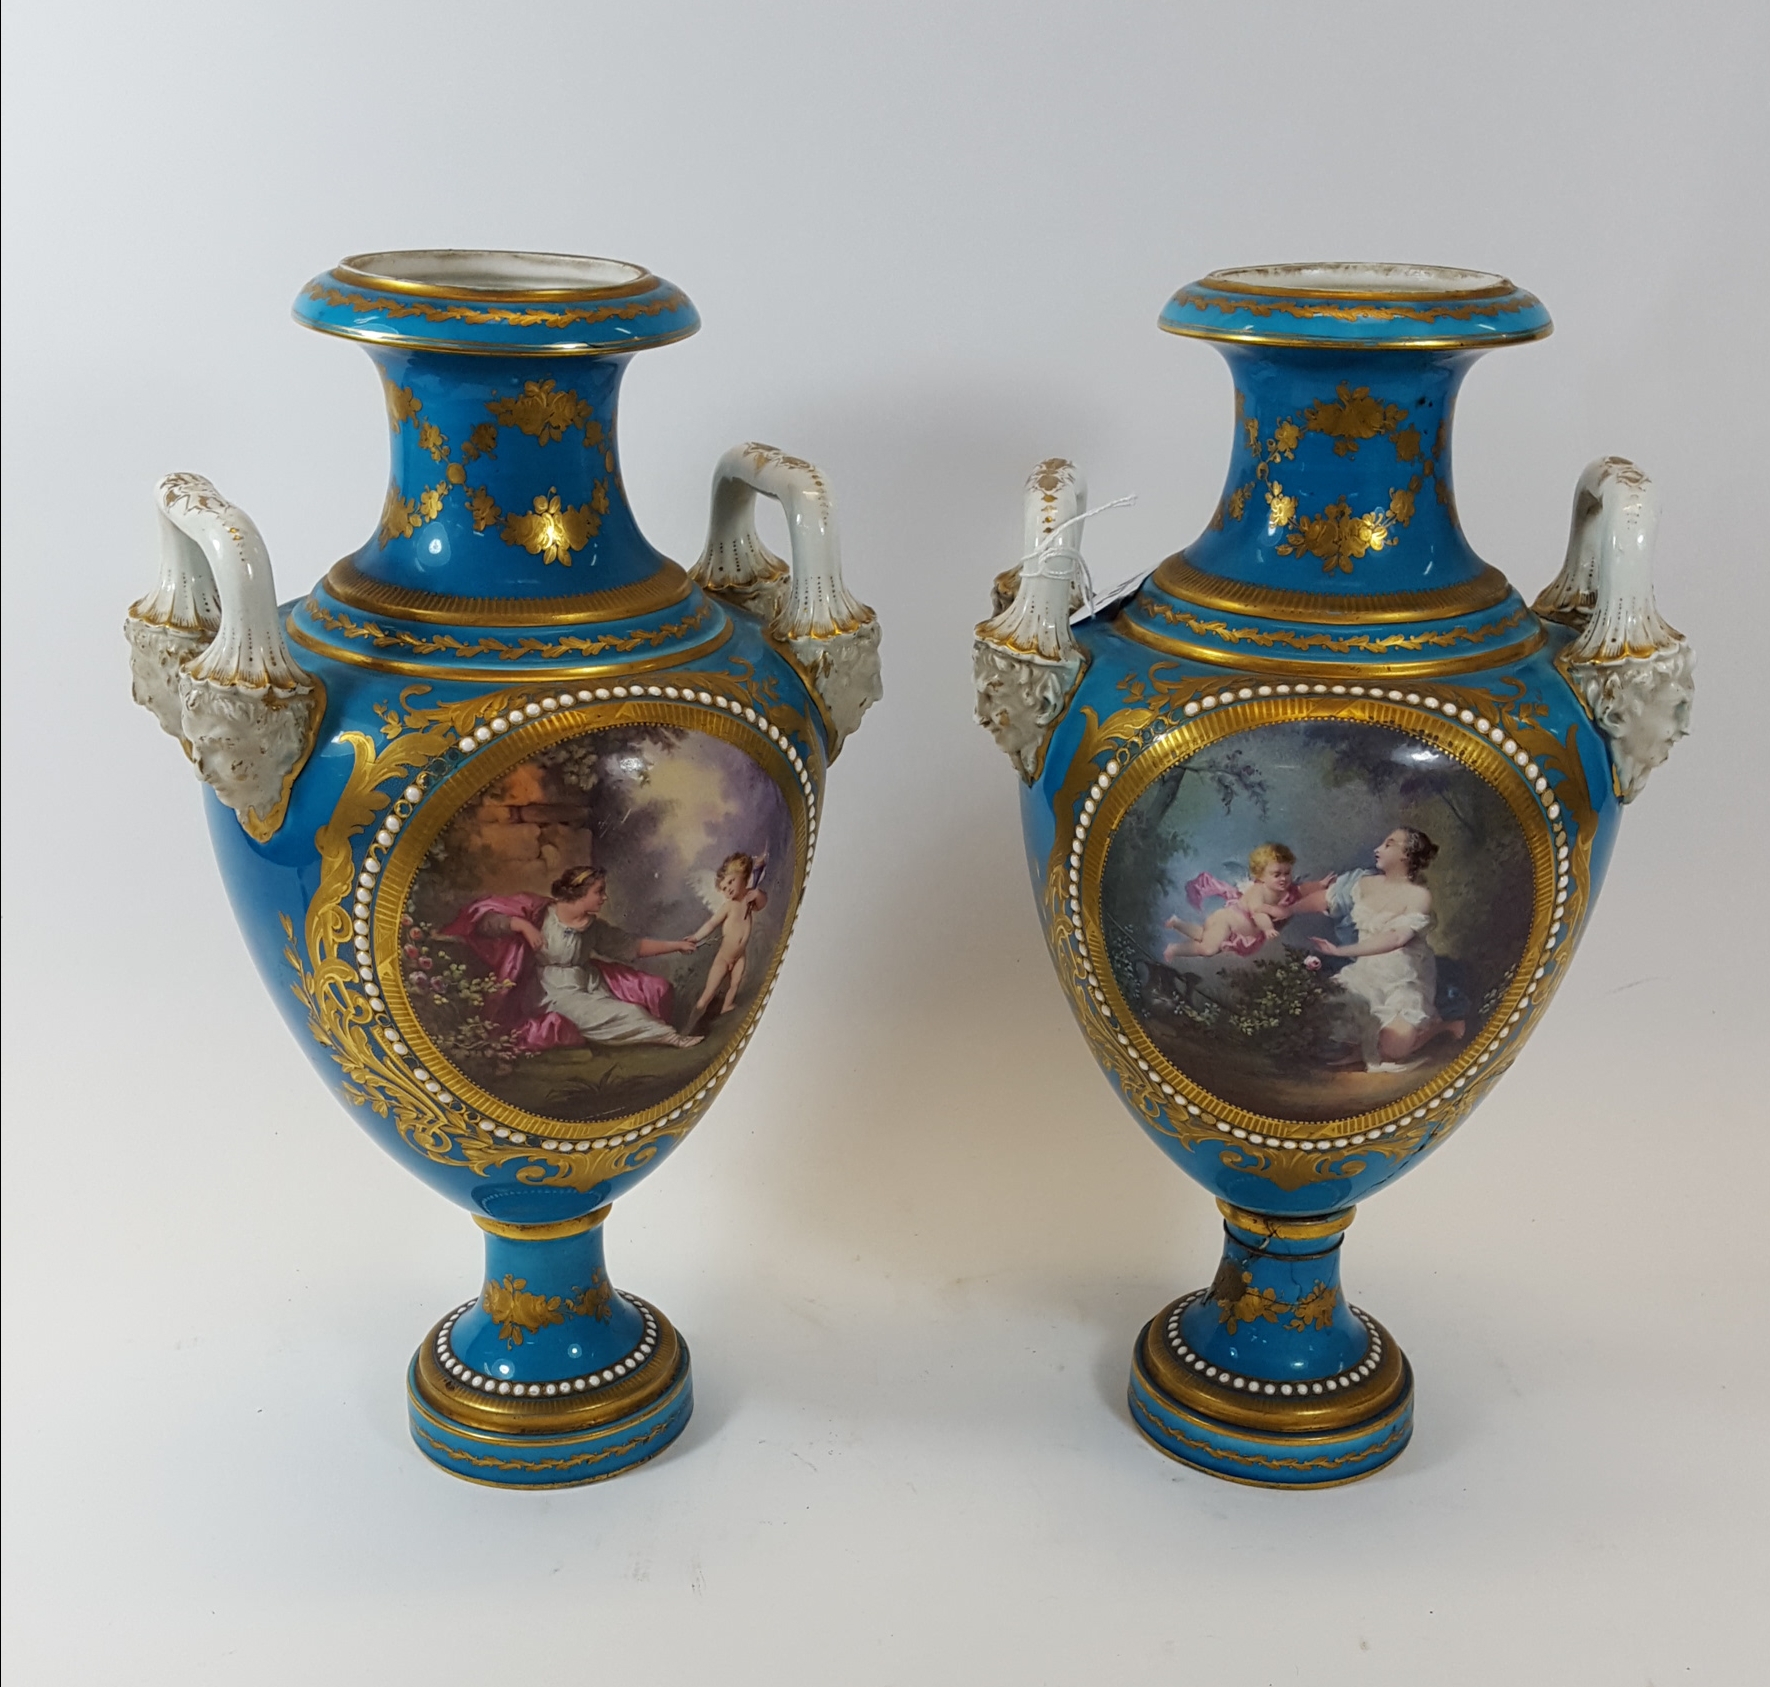 A PAIR OF LATE 19TH CENTURY FRENCH SEVRES STYLE PORCELAIN VASES,